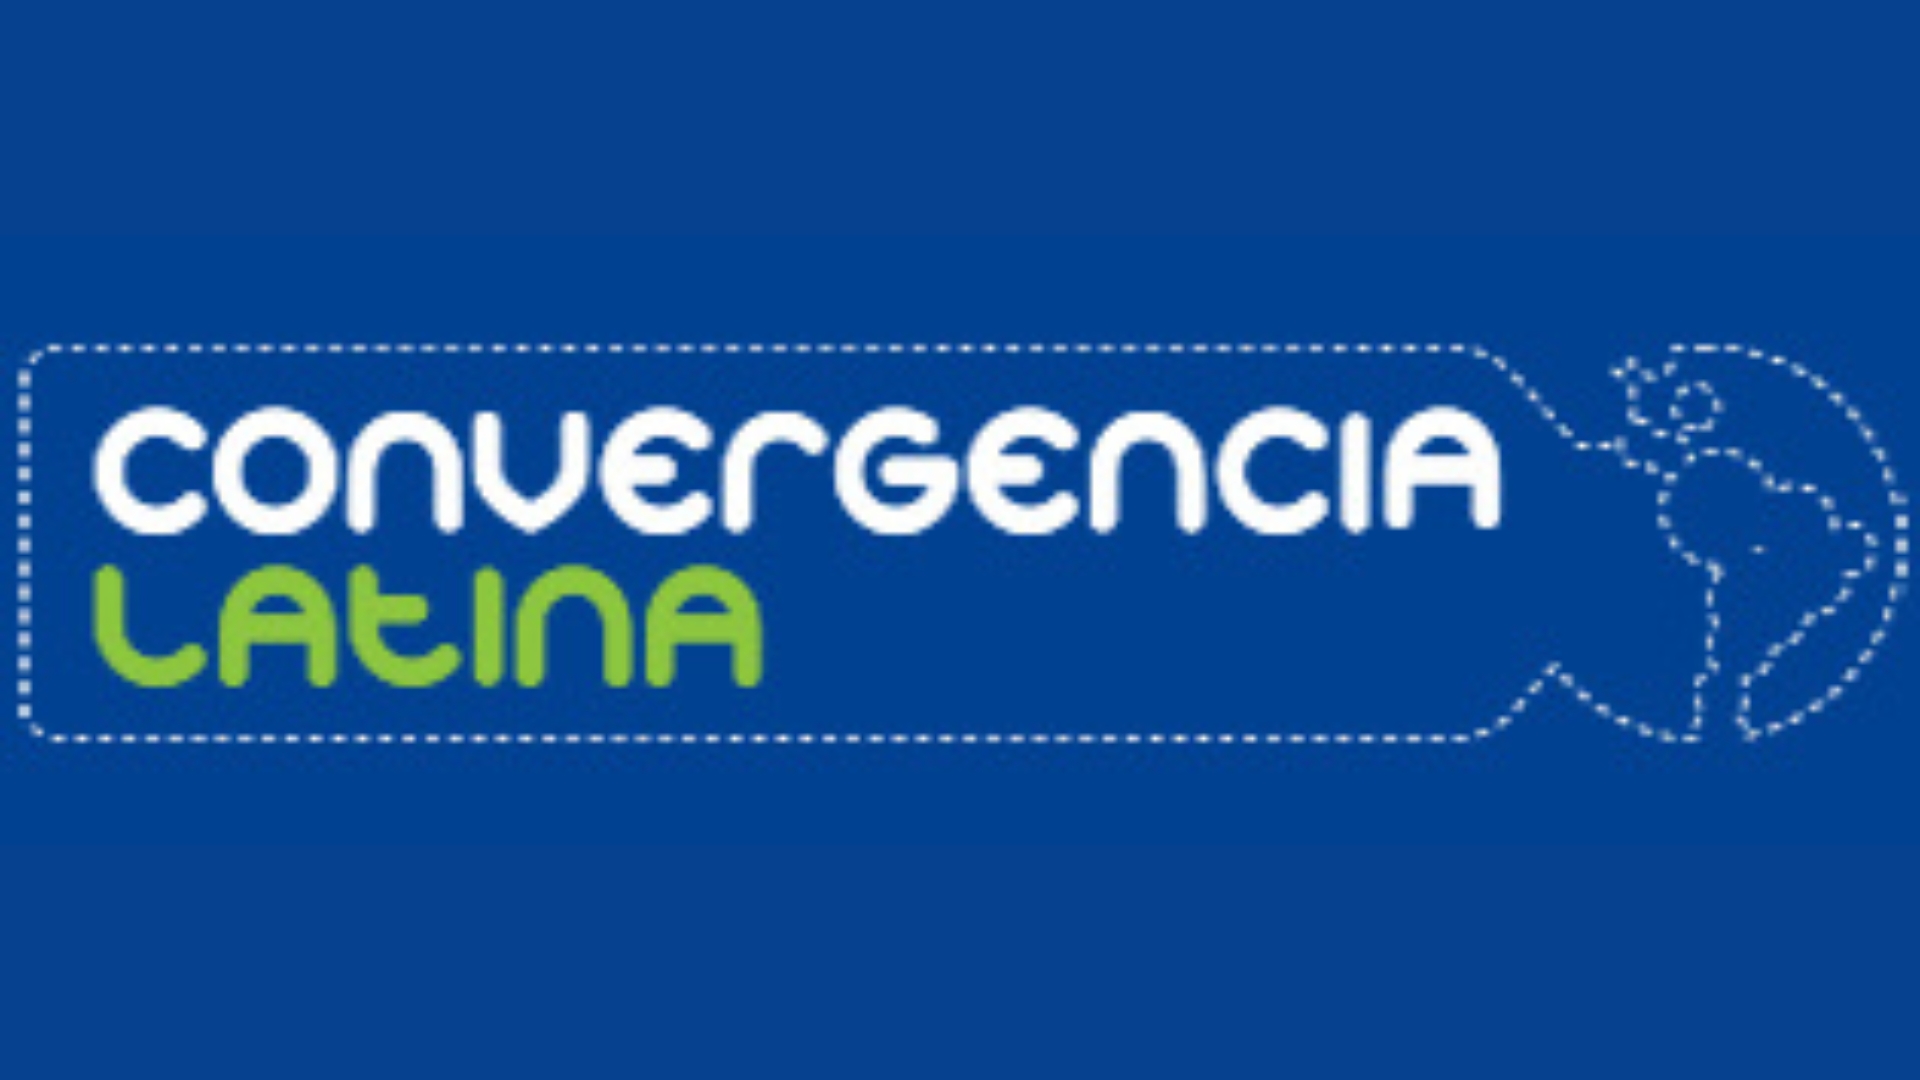 ConvergenciaLatina: Latin America must find its own view of the regulation of artificial intelligence